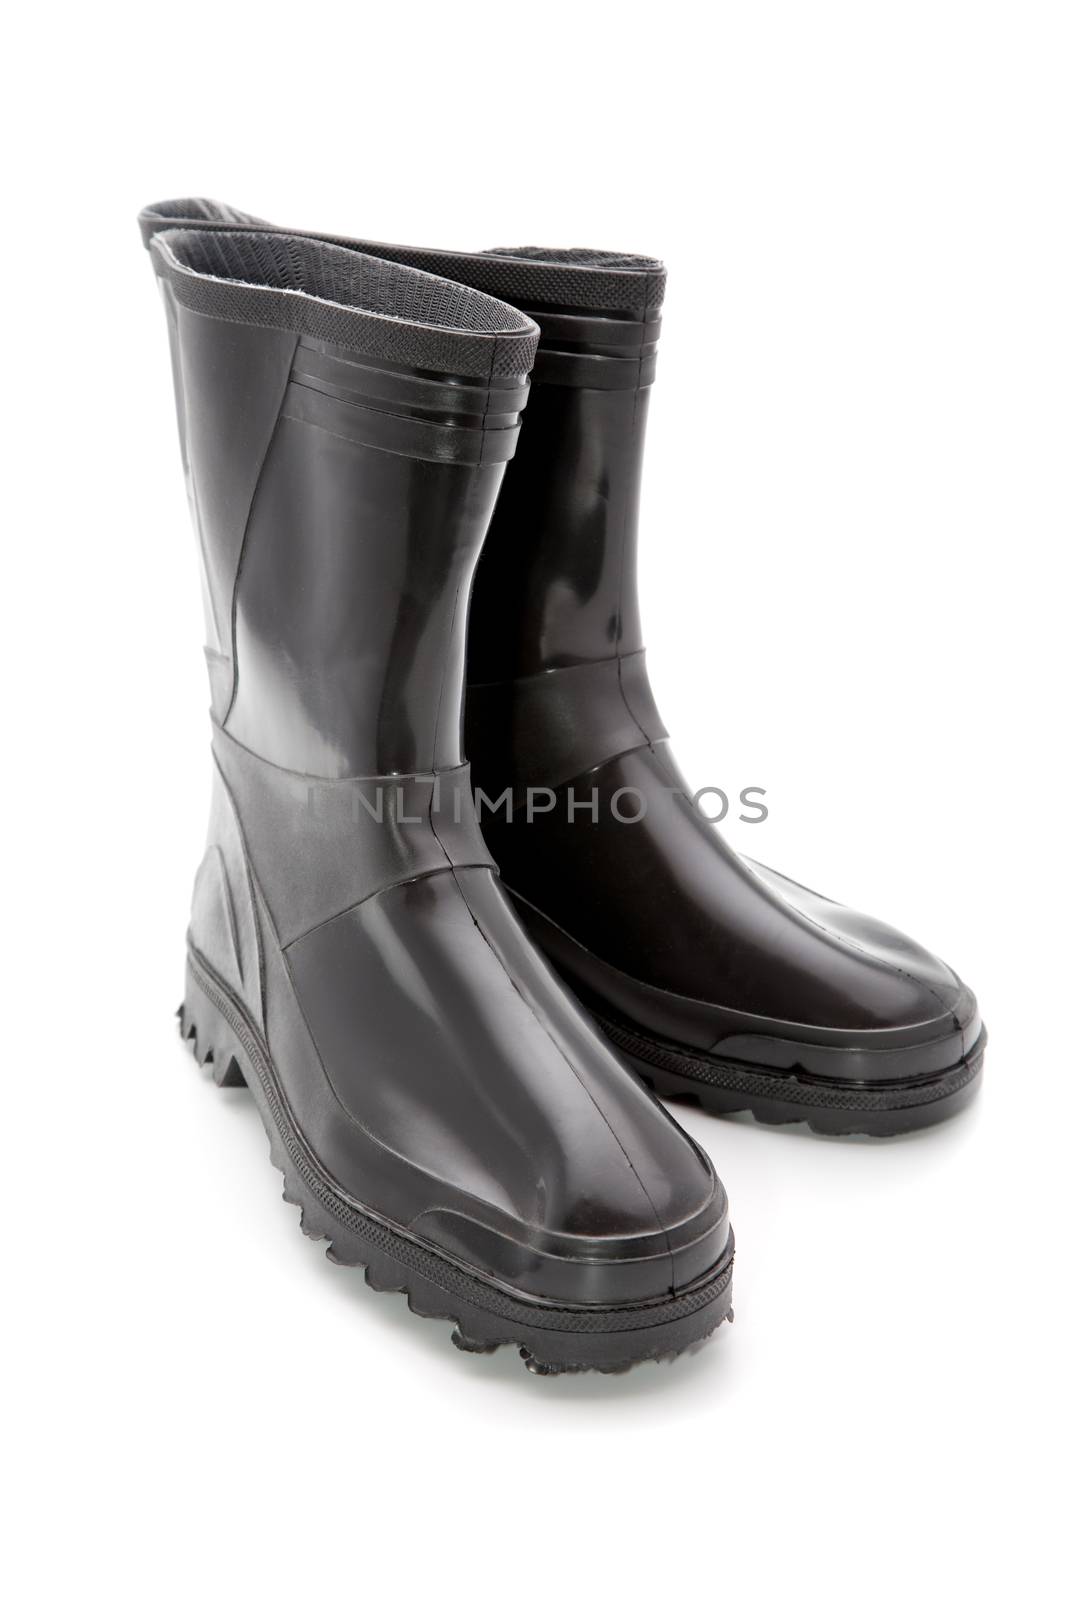 Black man's rubber boots on a white background by alarich